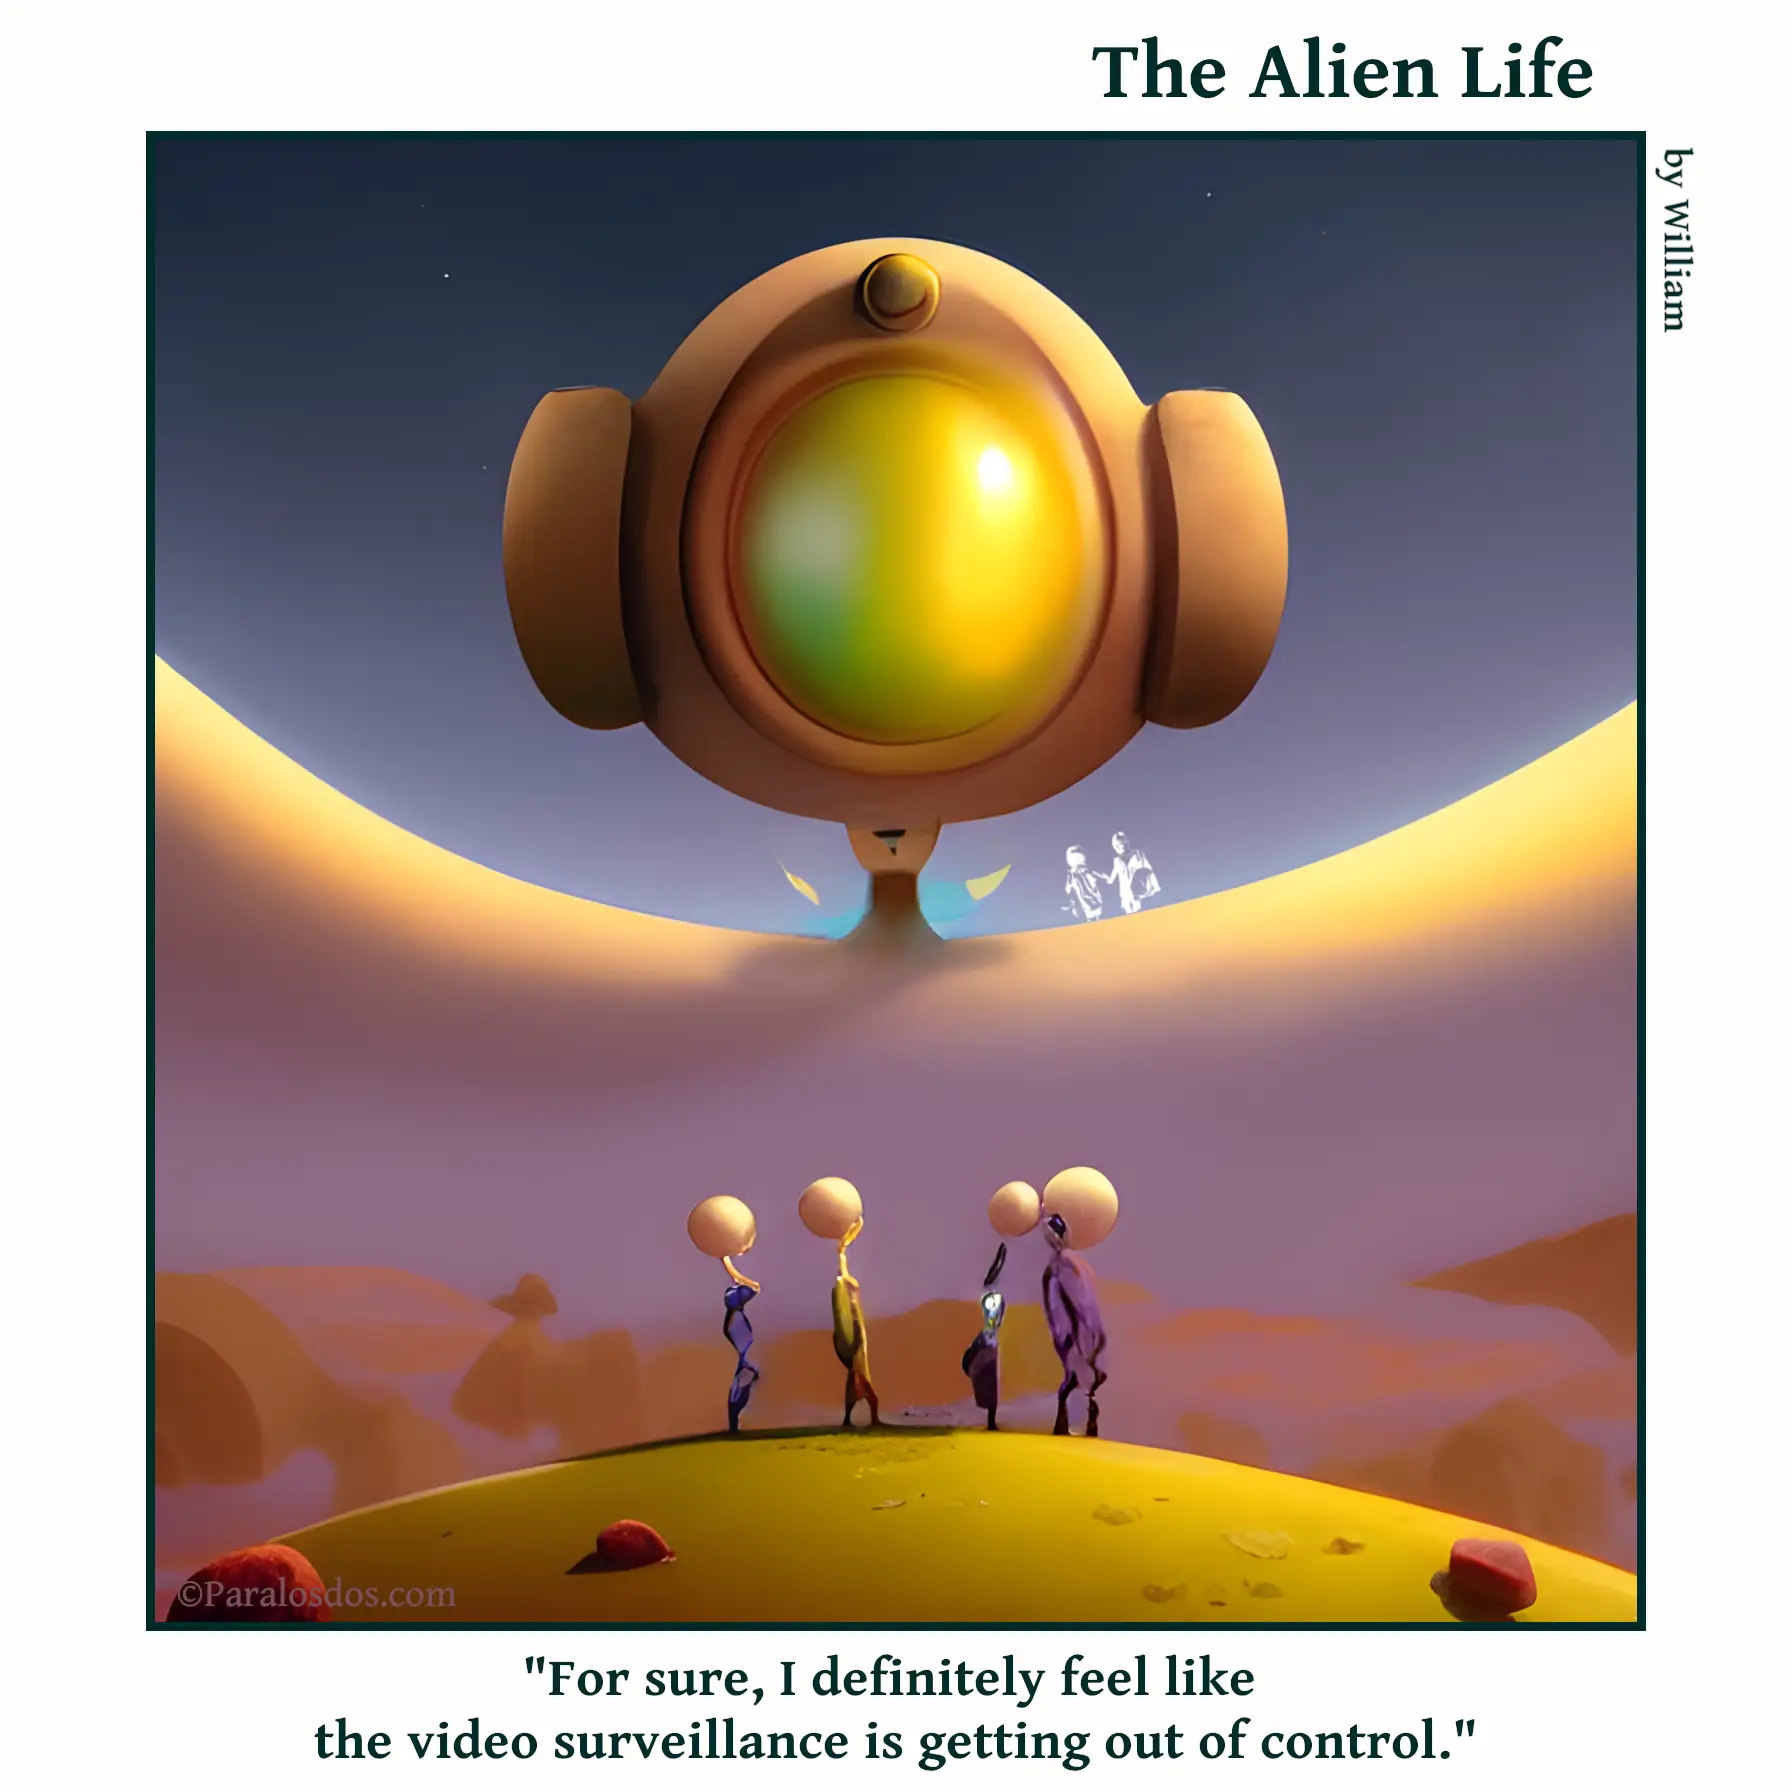 The Alien Life, one panel Comic. Four aliens are standing together, above them on a u-shaped dune is an enormous video surveillance camera. The caption reads: "For sure, I definitely feel like the video surveillance is getting out of control."